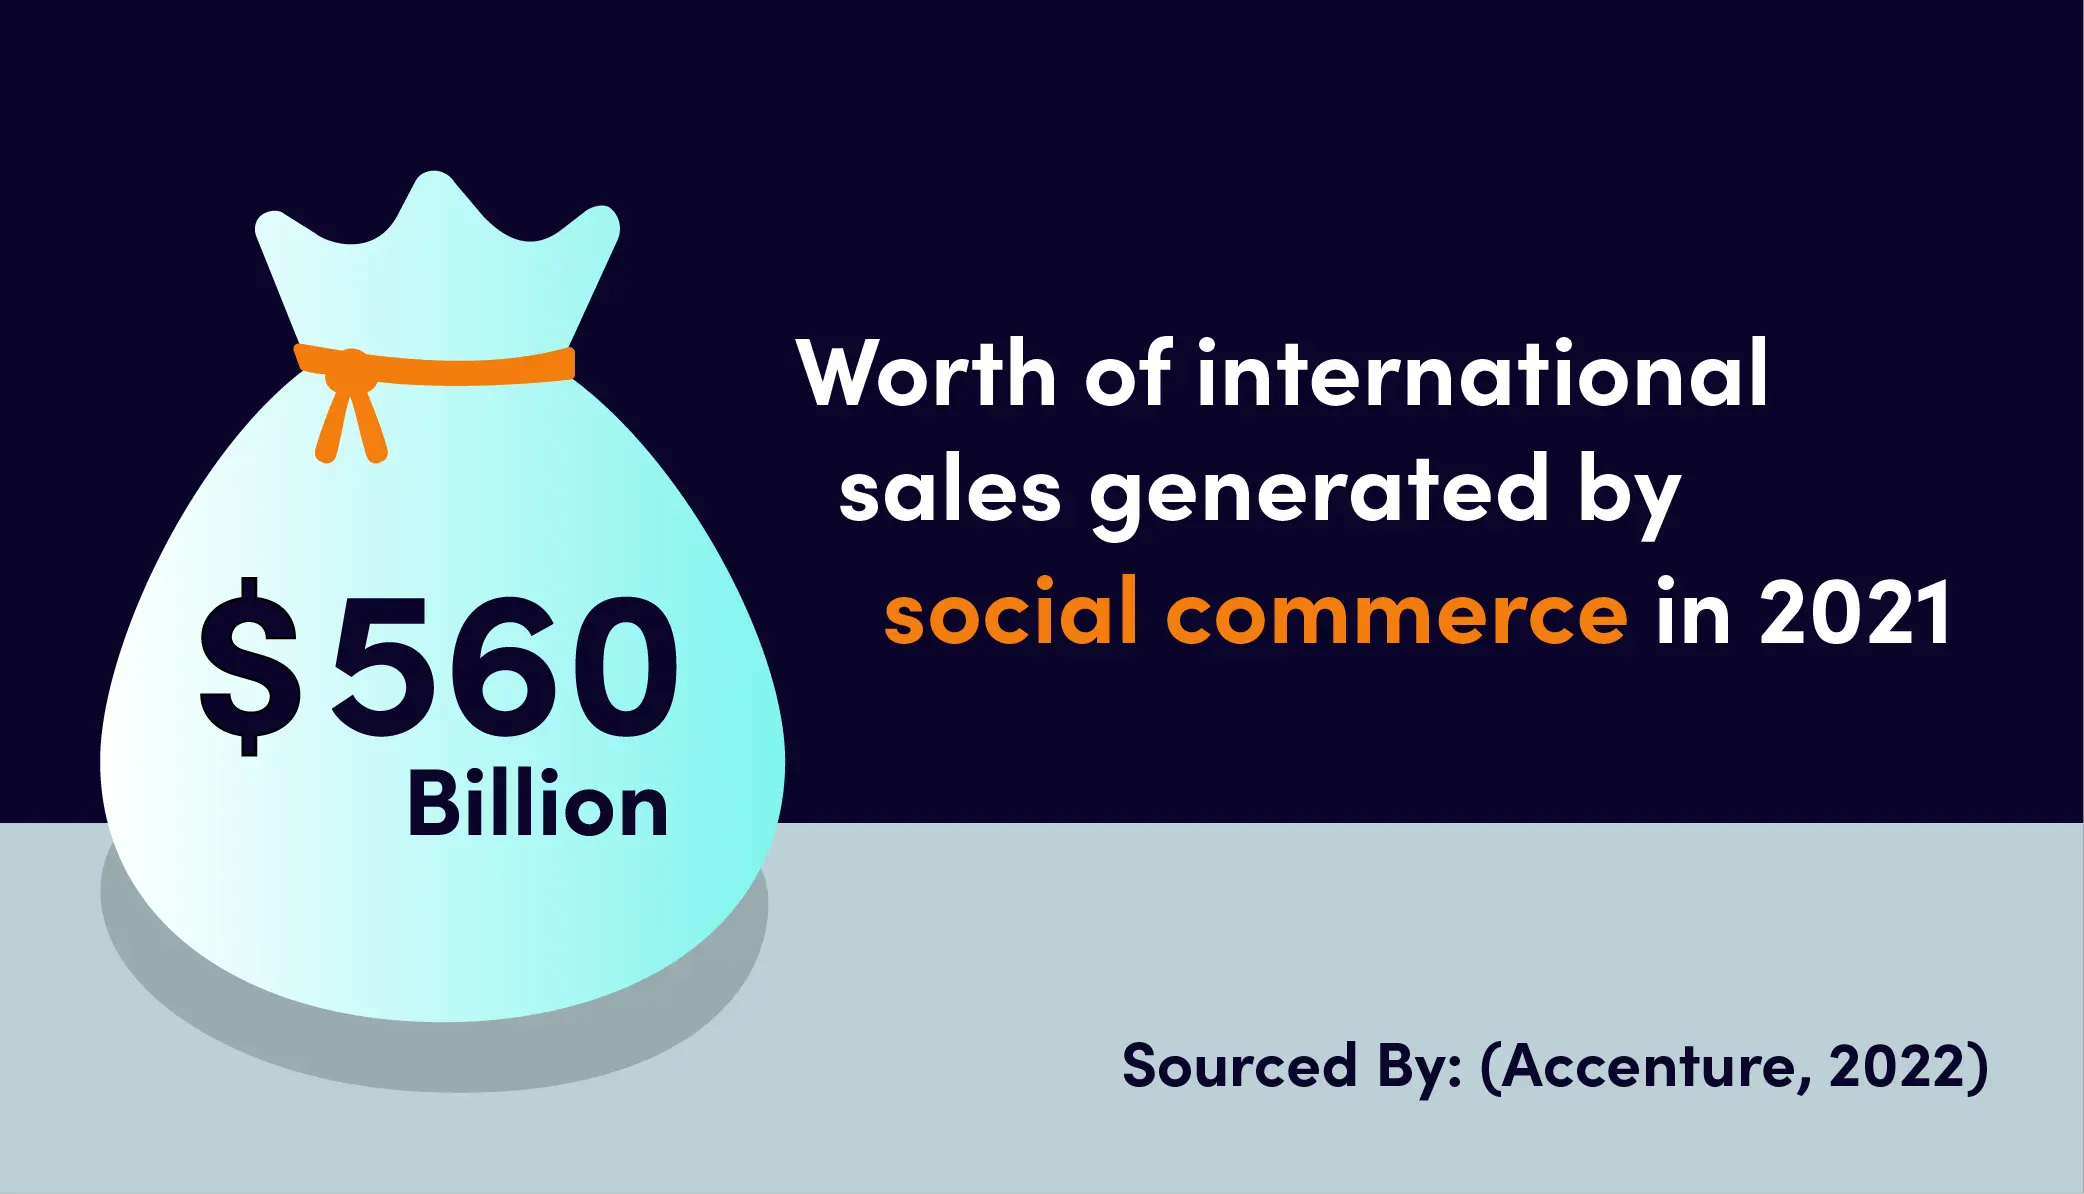 Image showing $560 billion worth of international sales generated by social commerce in 2021